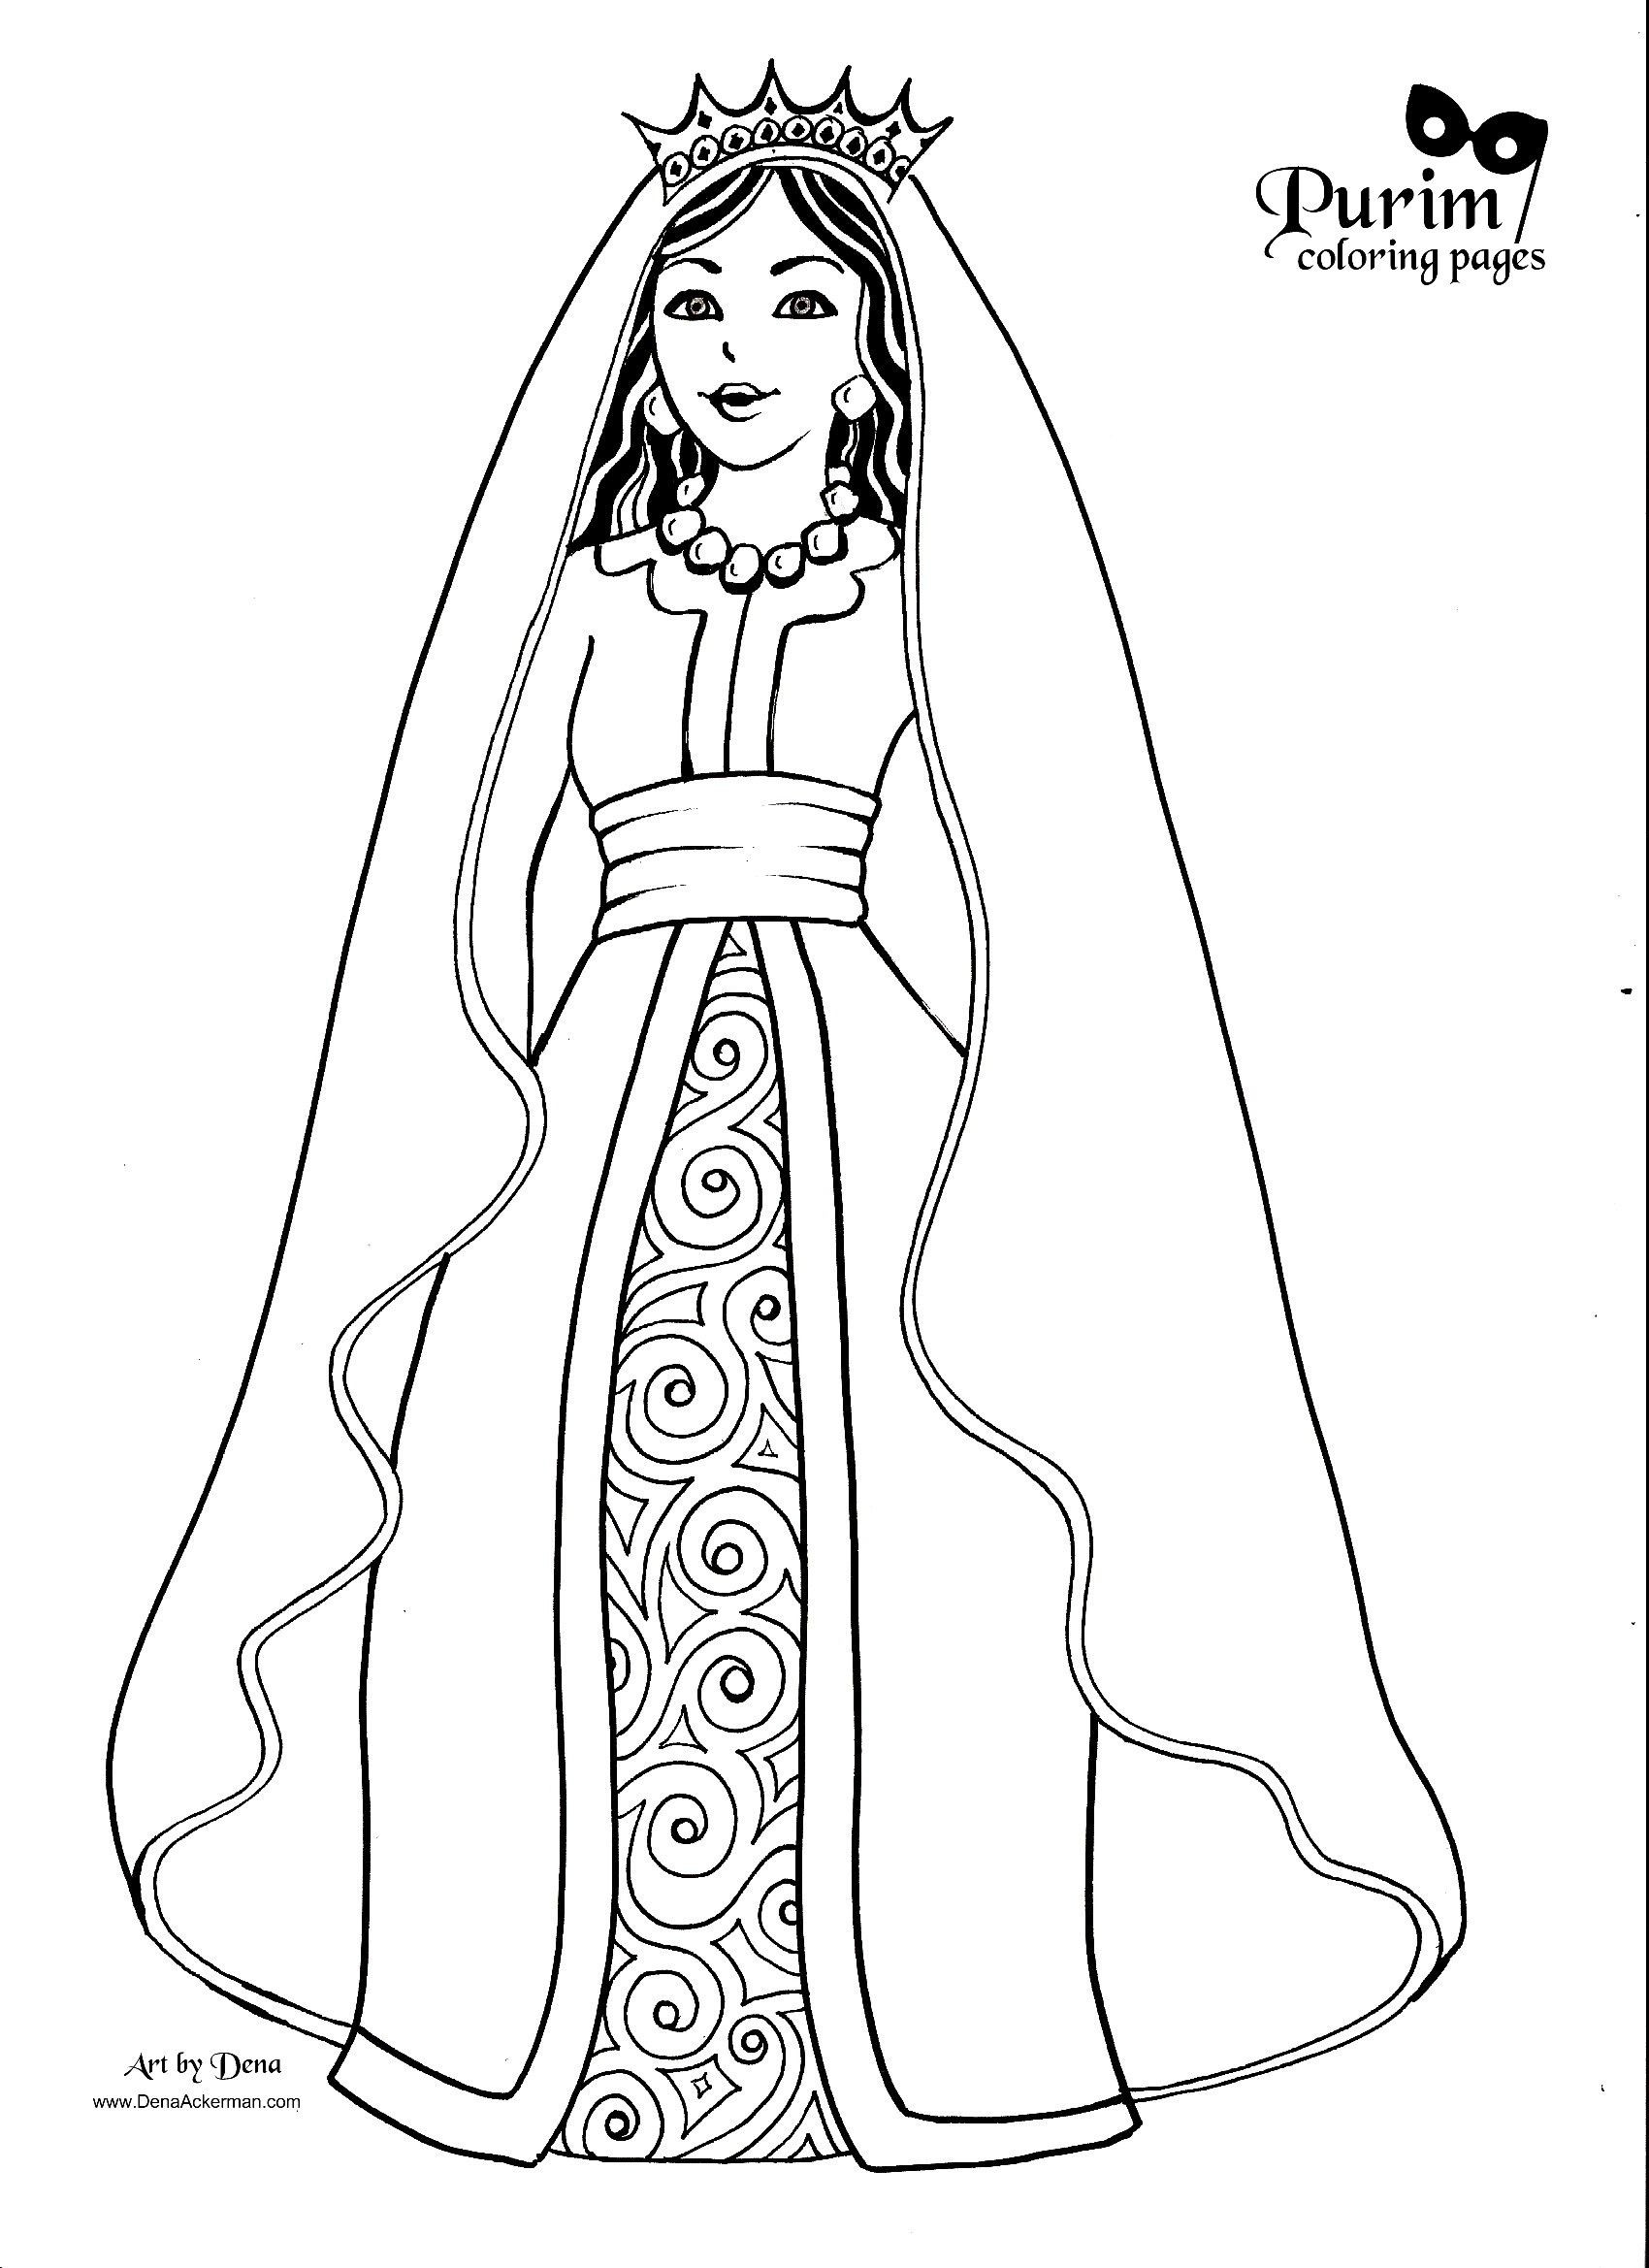 Esther this page has great coloring pages for Purim